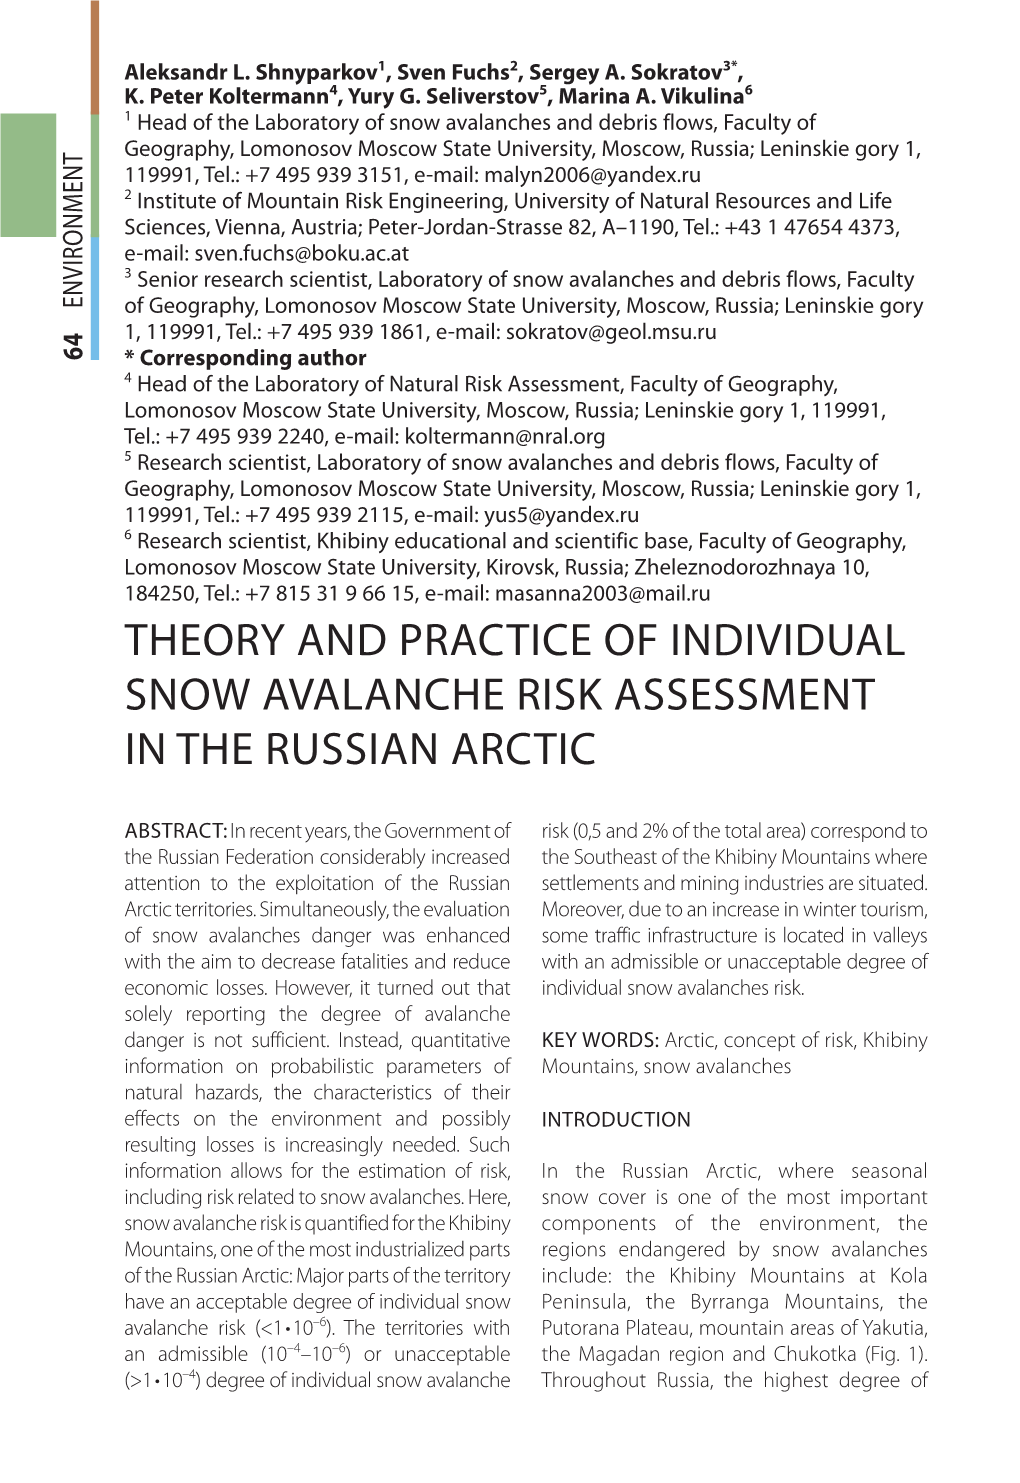 Theory and Practice of Individual Snow Avalanche